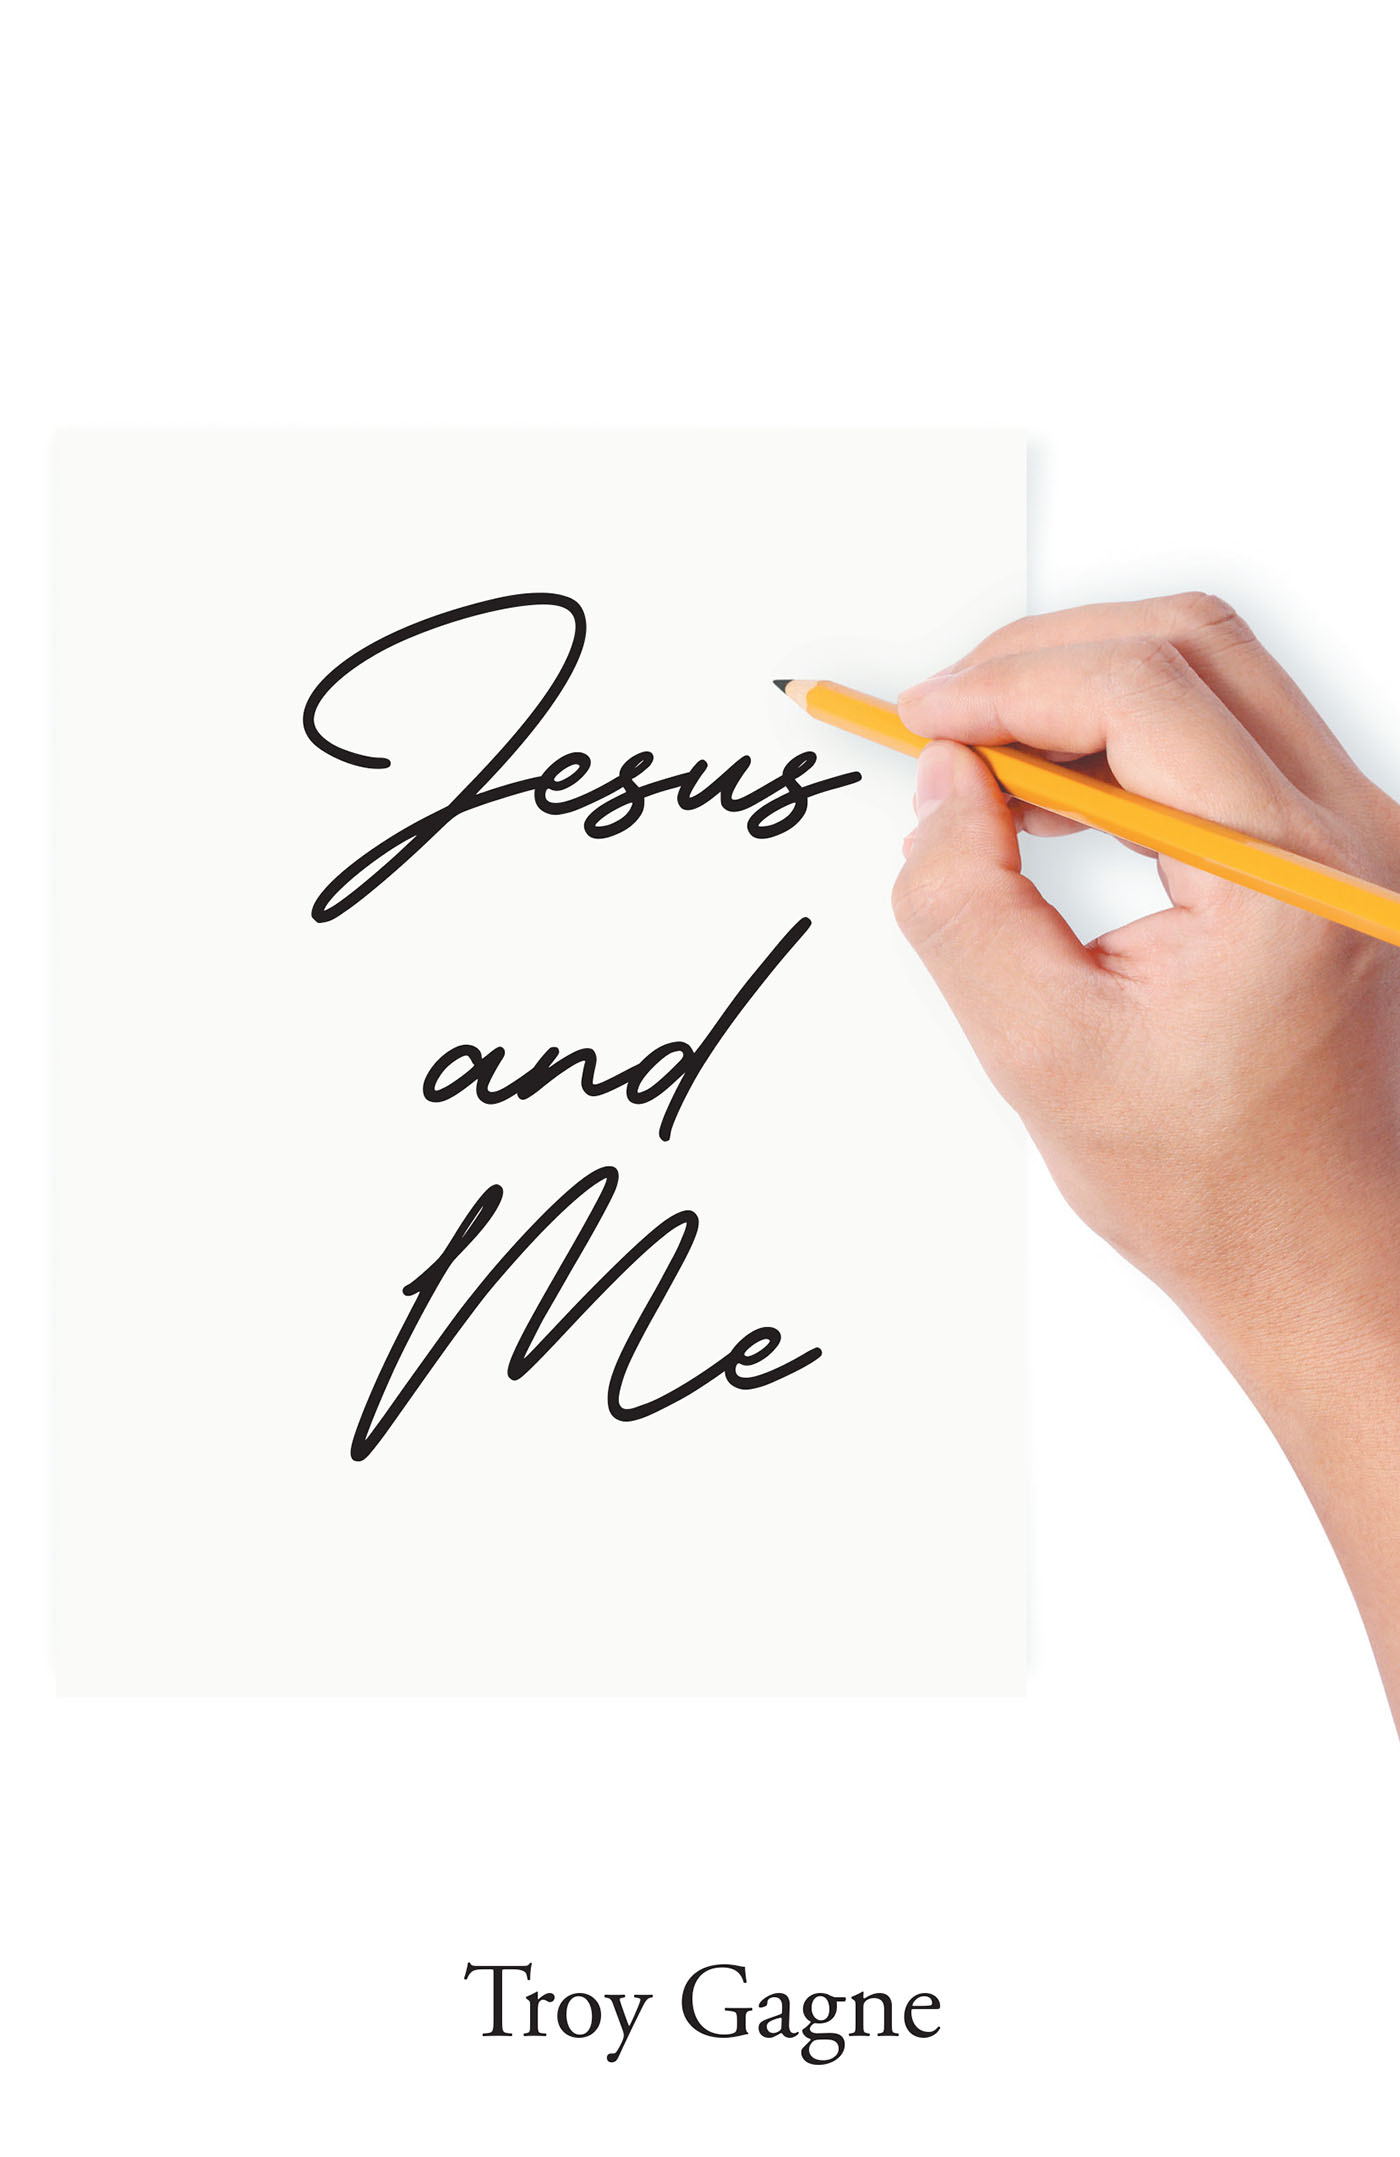 Troy Gagne’s Newly Released "Jesus and Me" is a Warmhearted Collection of Poetry That Encourages Readers to Slow Down and Breath Life in